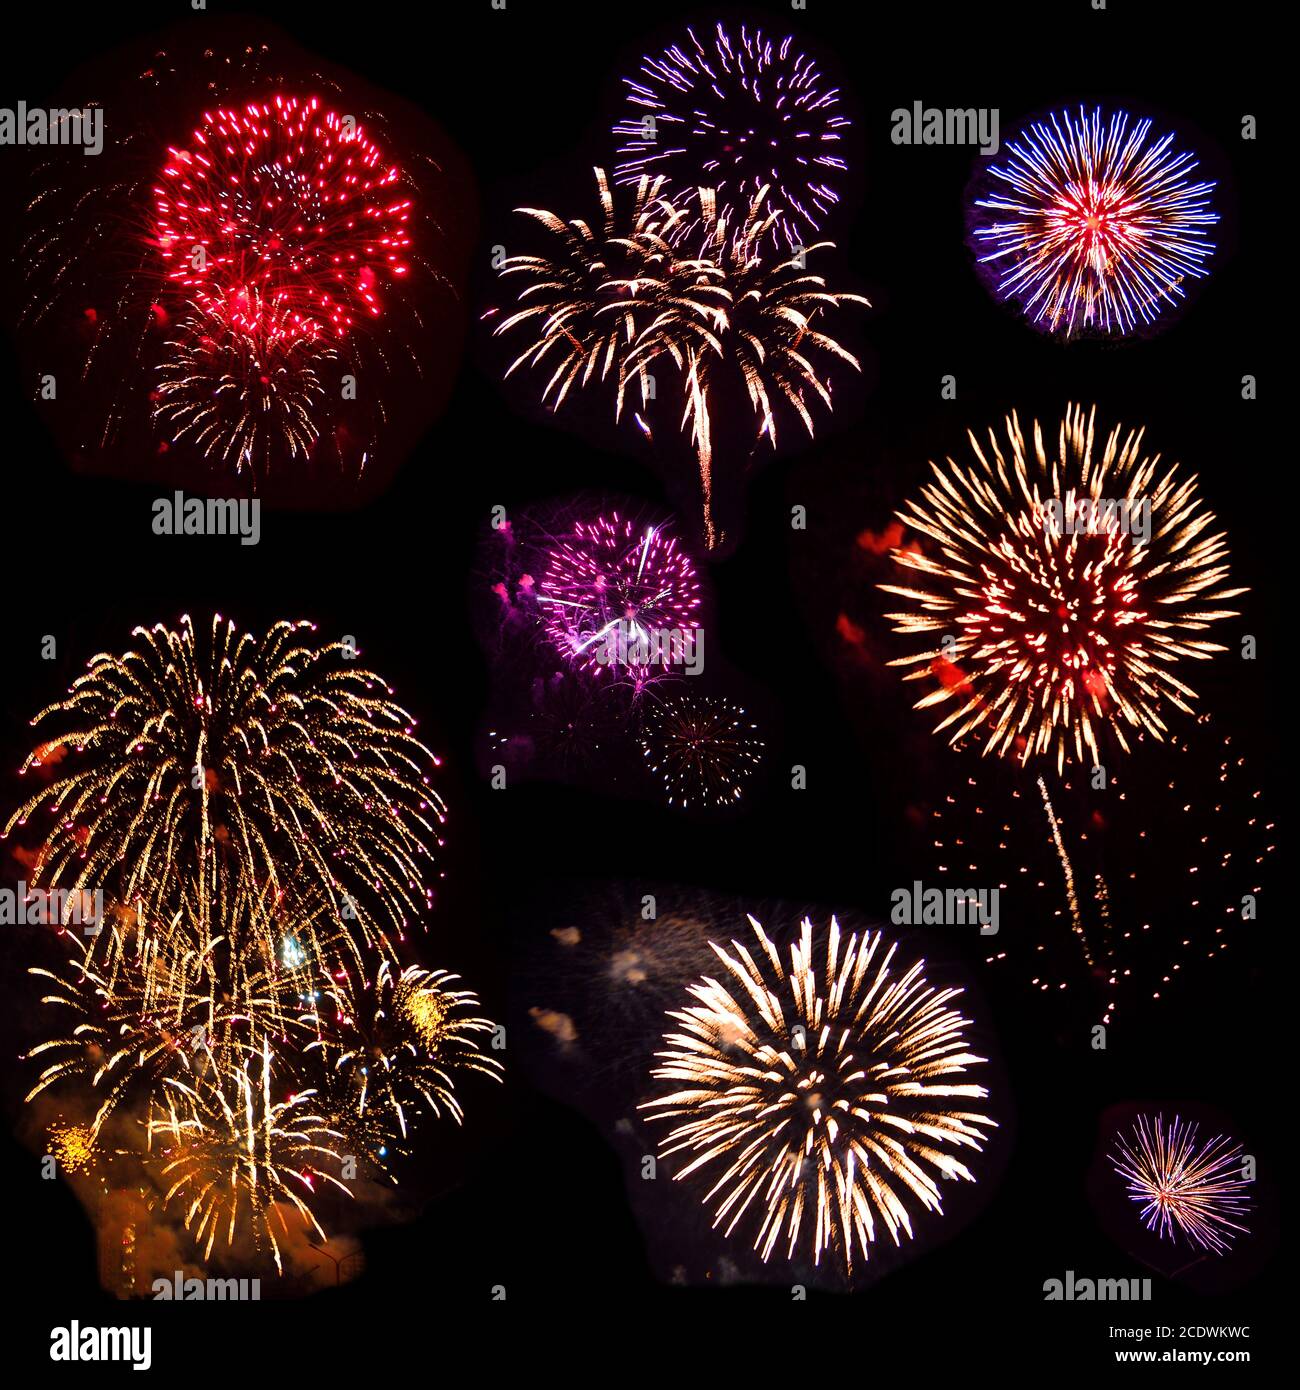 Colorful set of eight exploded fireworks, isolated on black background Stock Photo